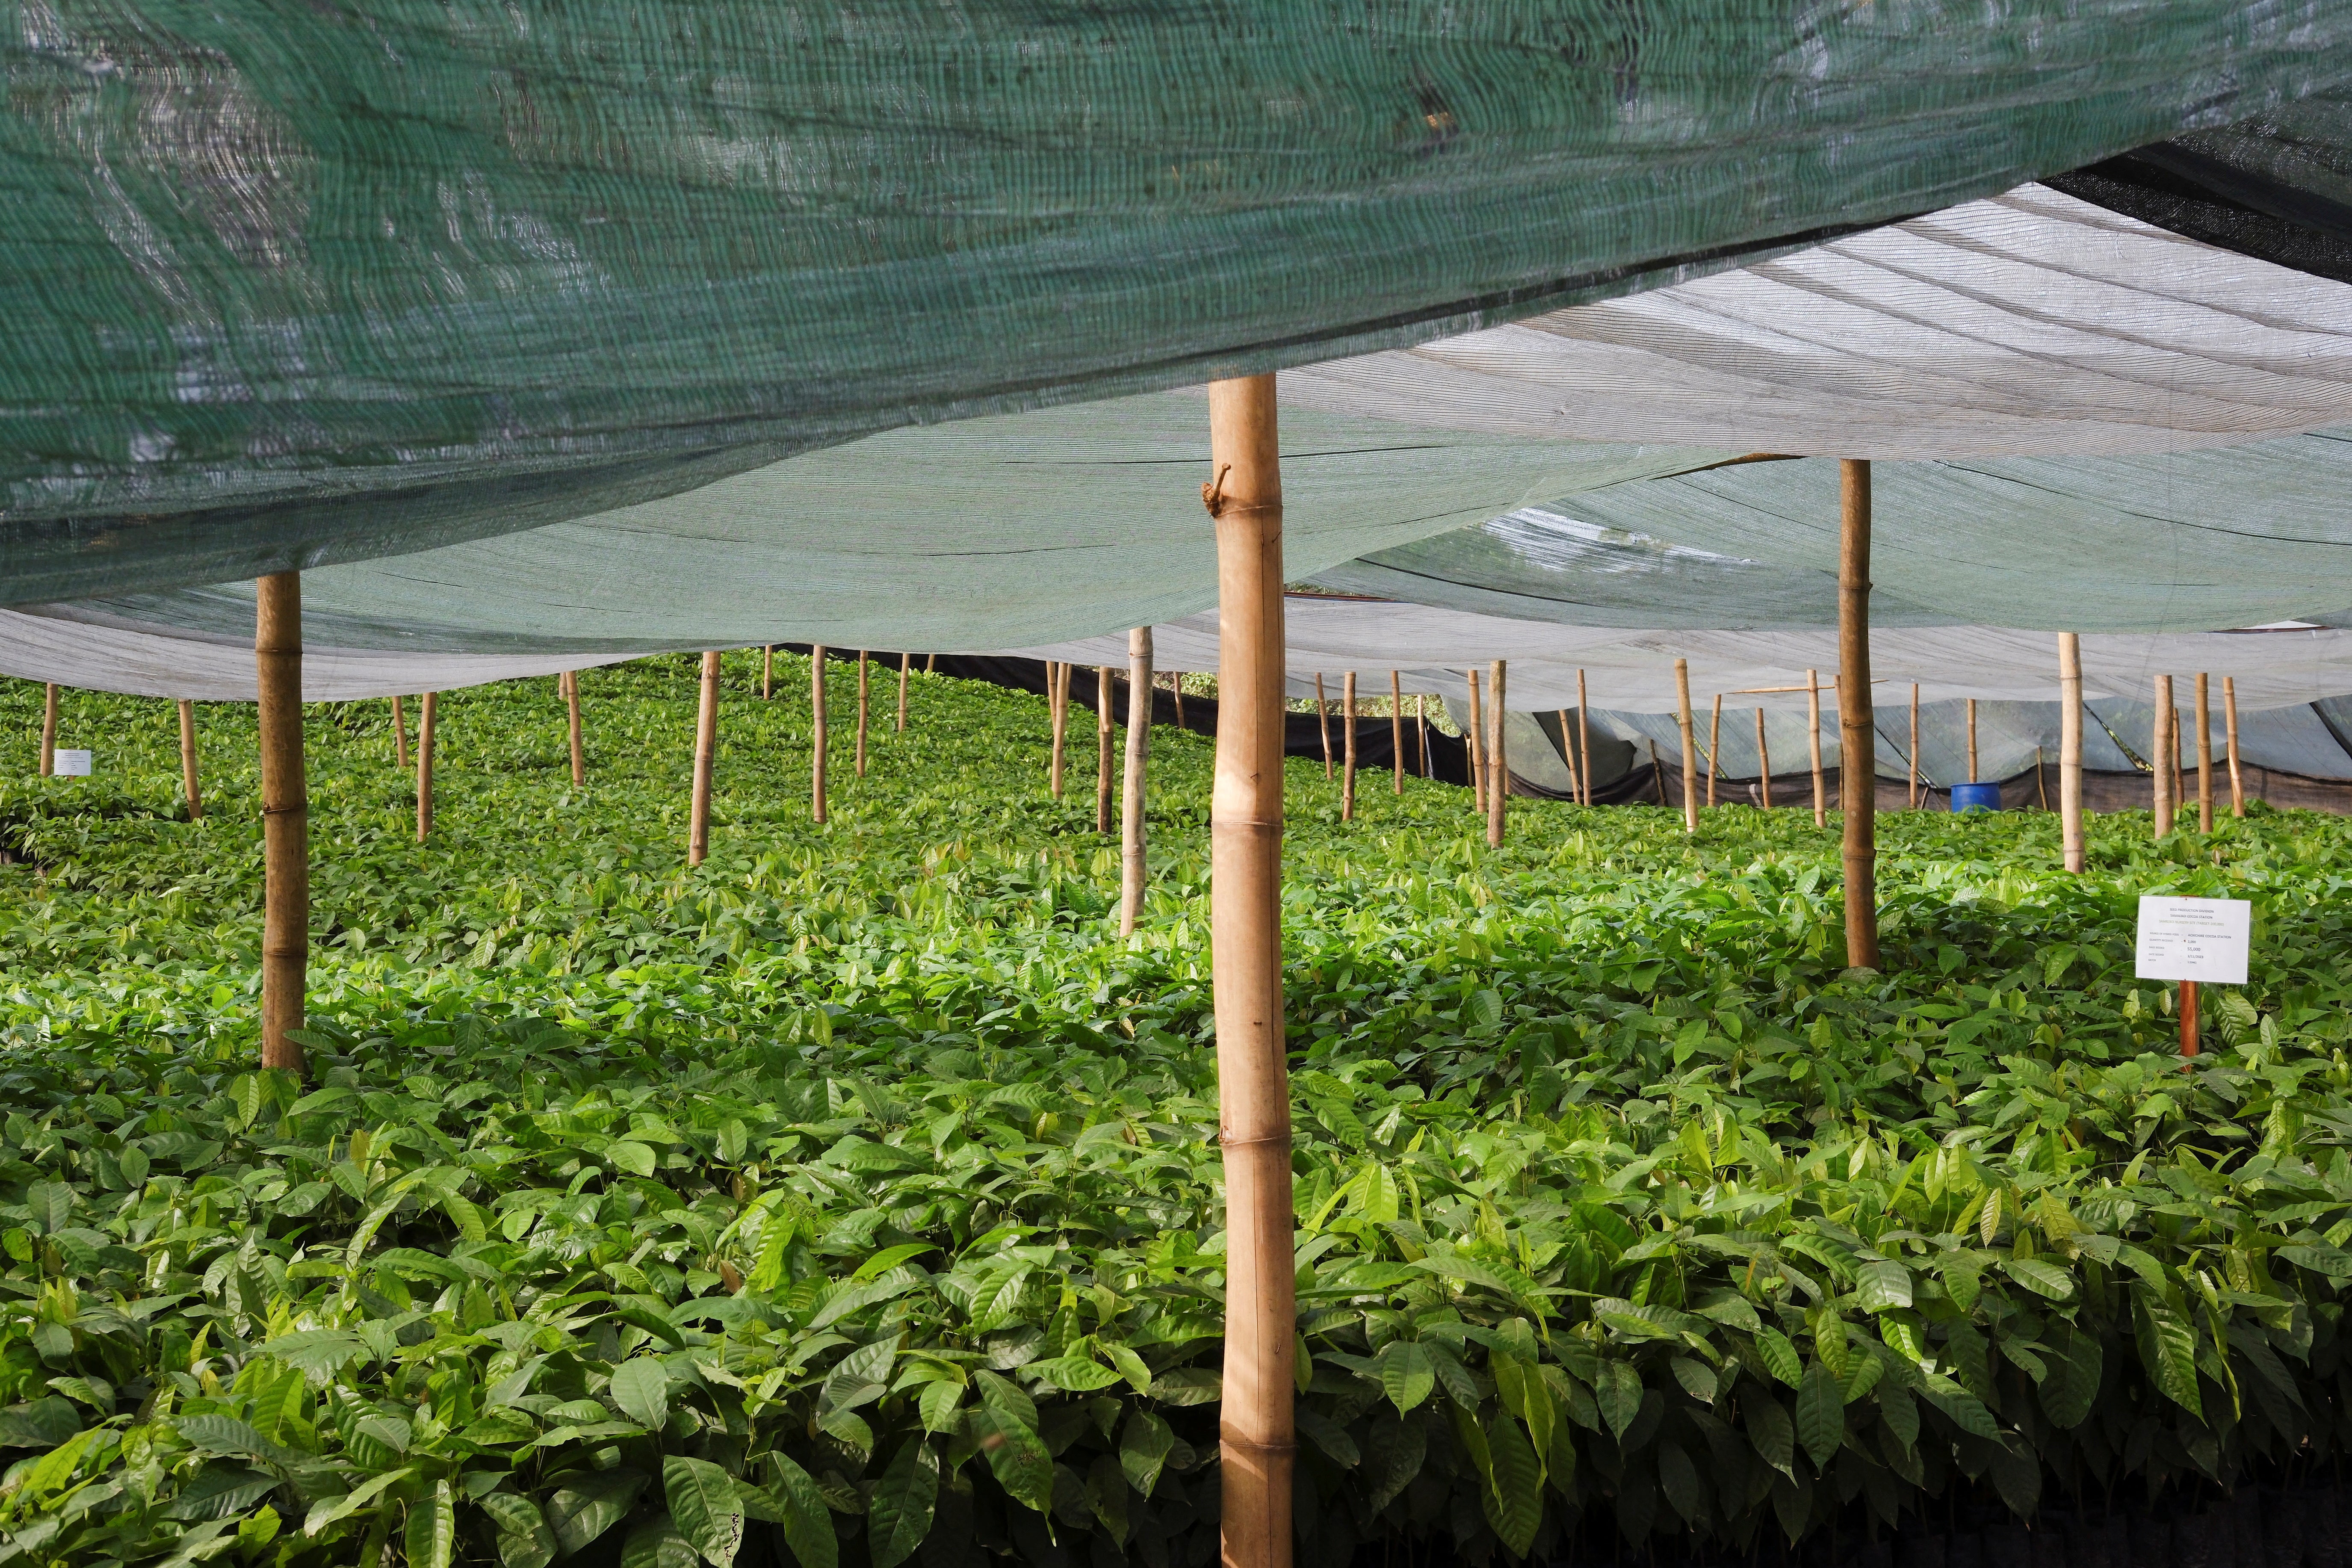 A view of a nursery where hybrid cocoa seedlings are grown, in the Samreboi community in the Western region